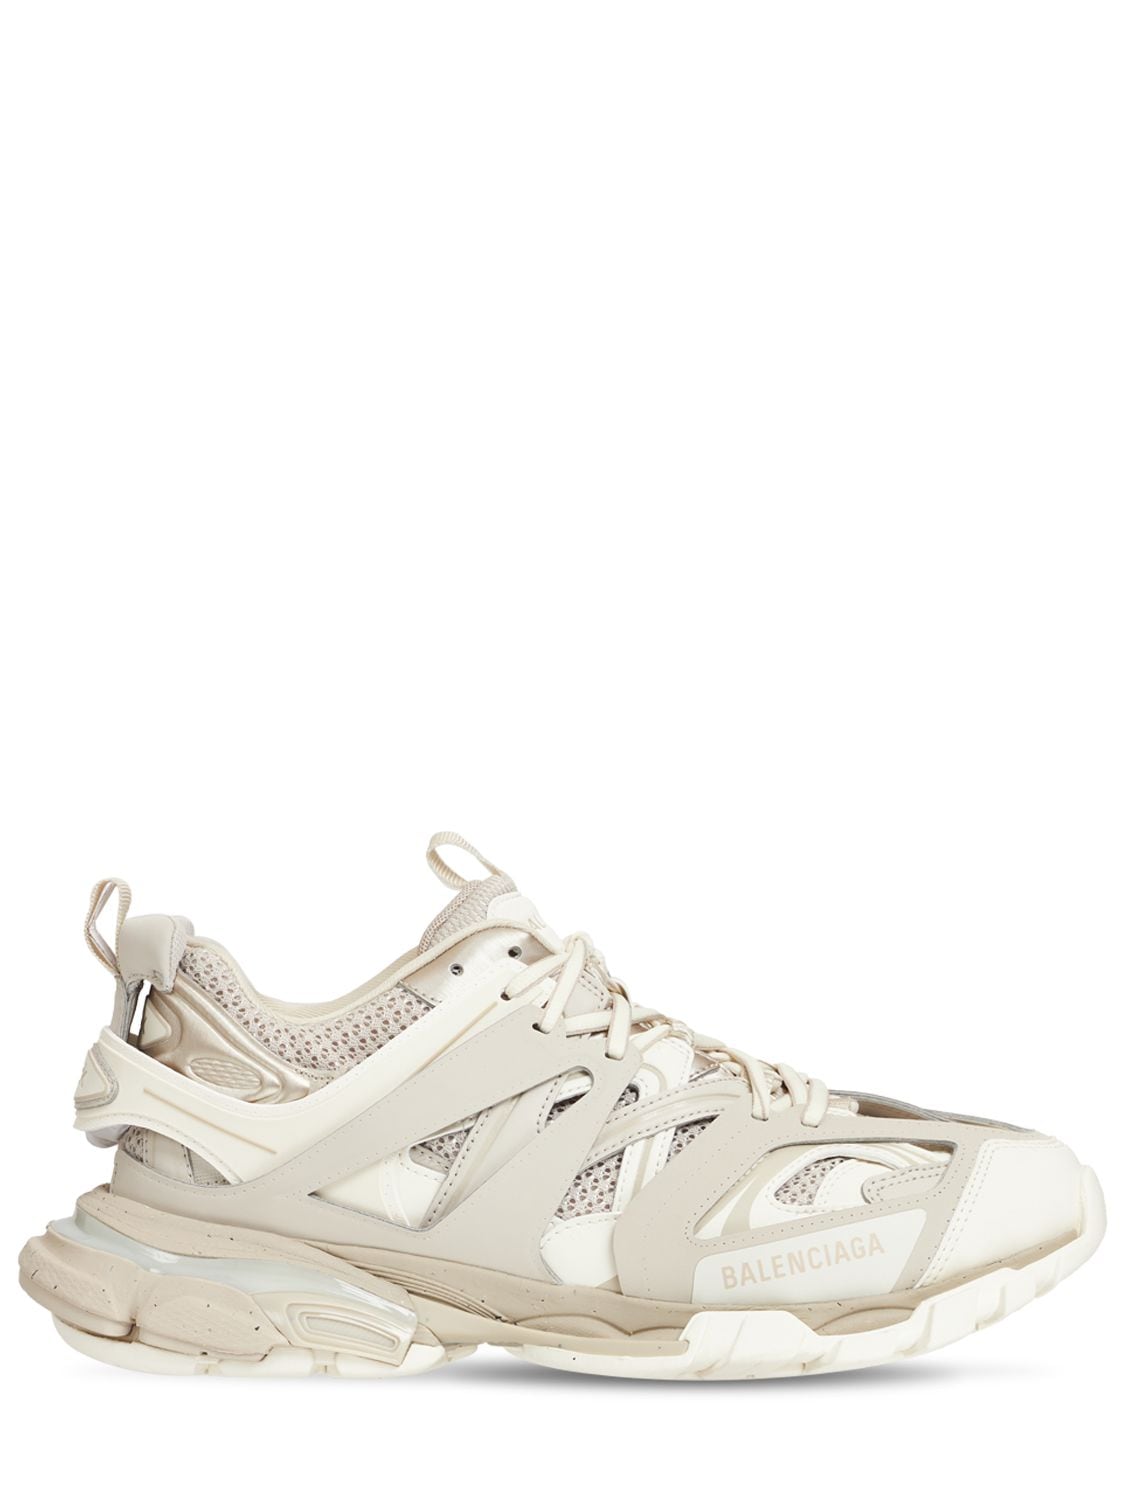 Balenciaga Track Faux Leather Sneakers In Beige | ModeSens